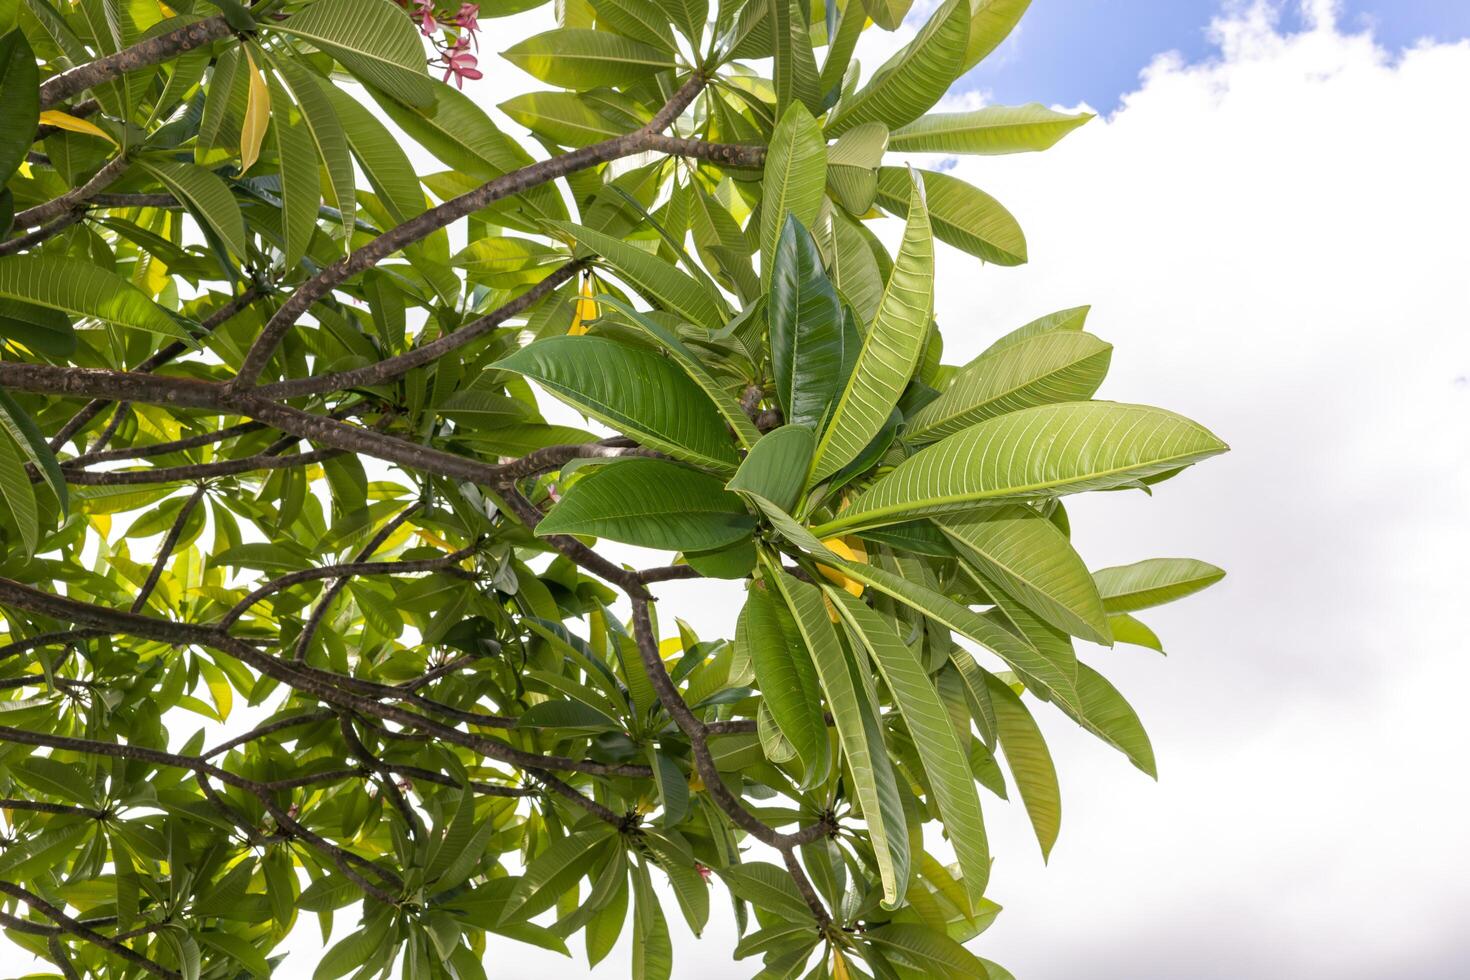 White flower Frangipani or plumeria in green leaf with clear blue sky in background. photo